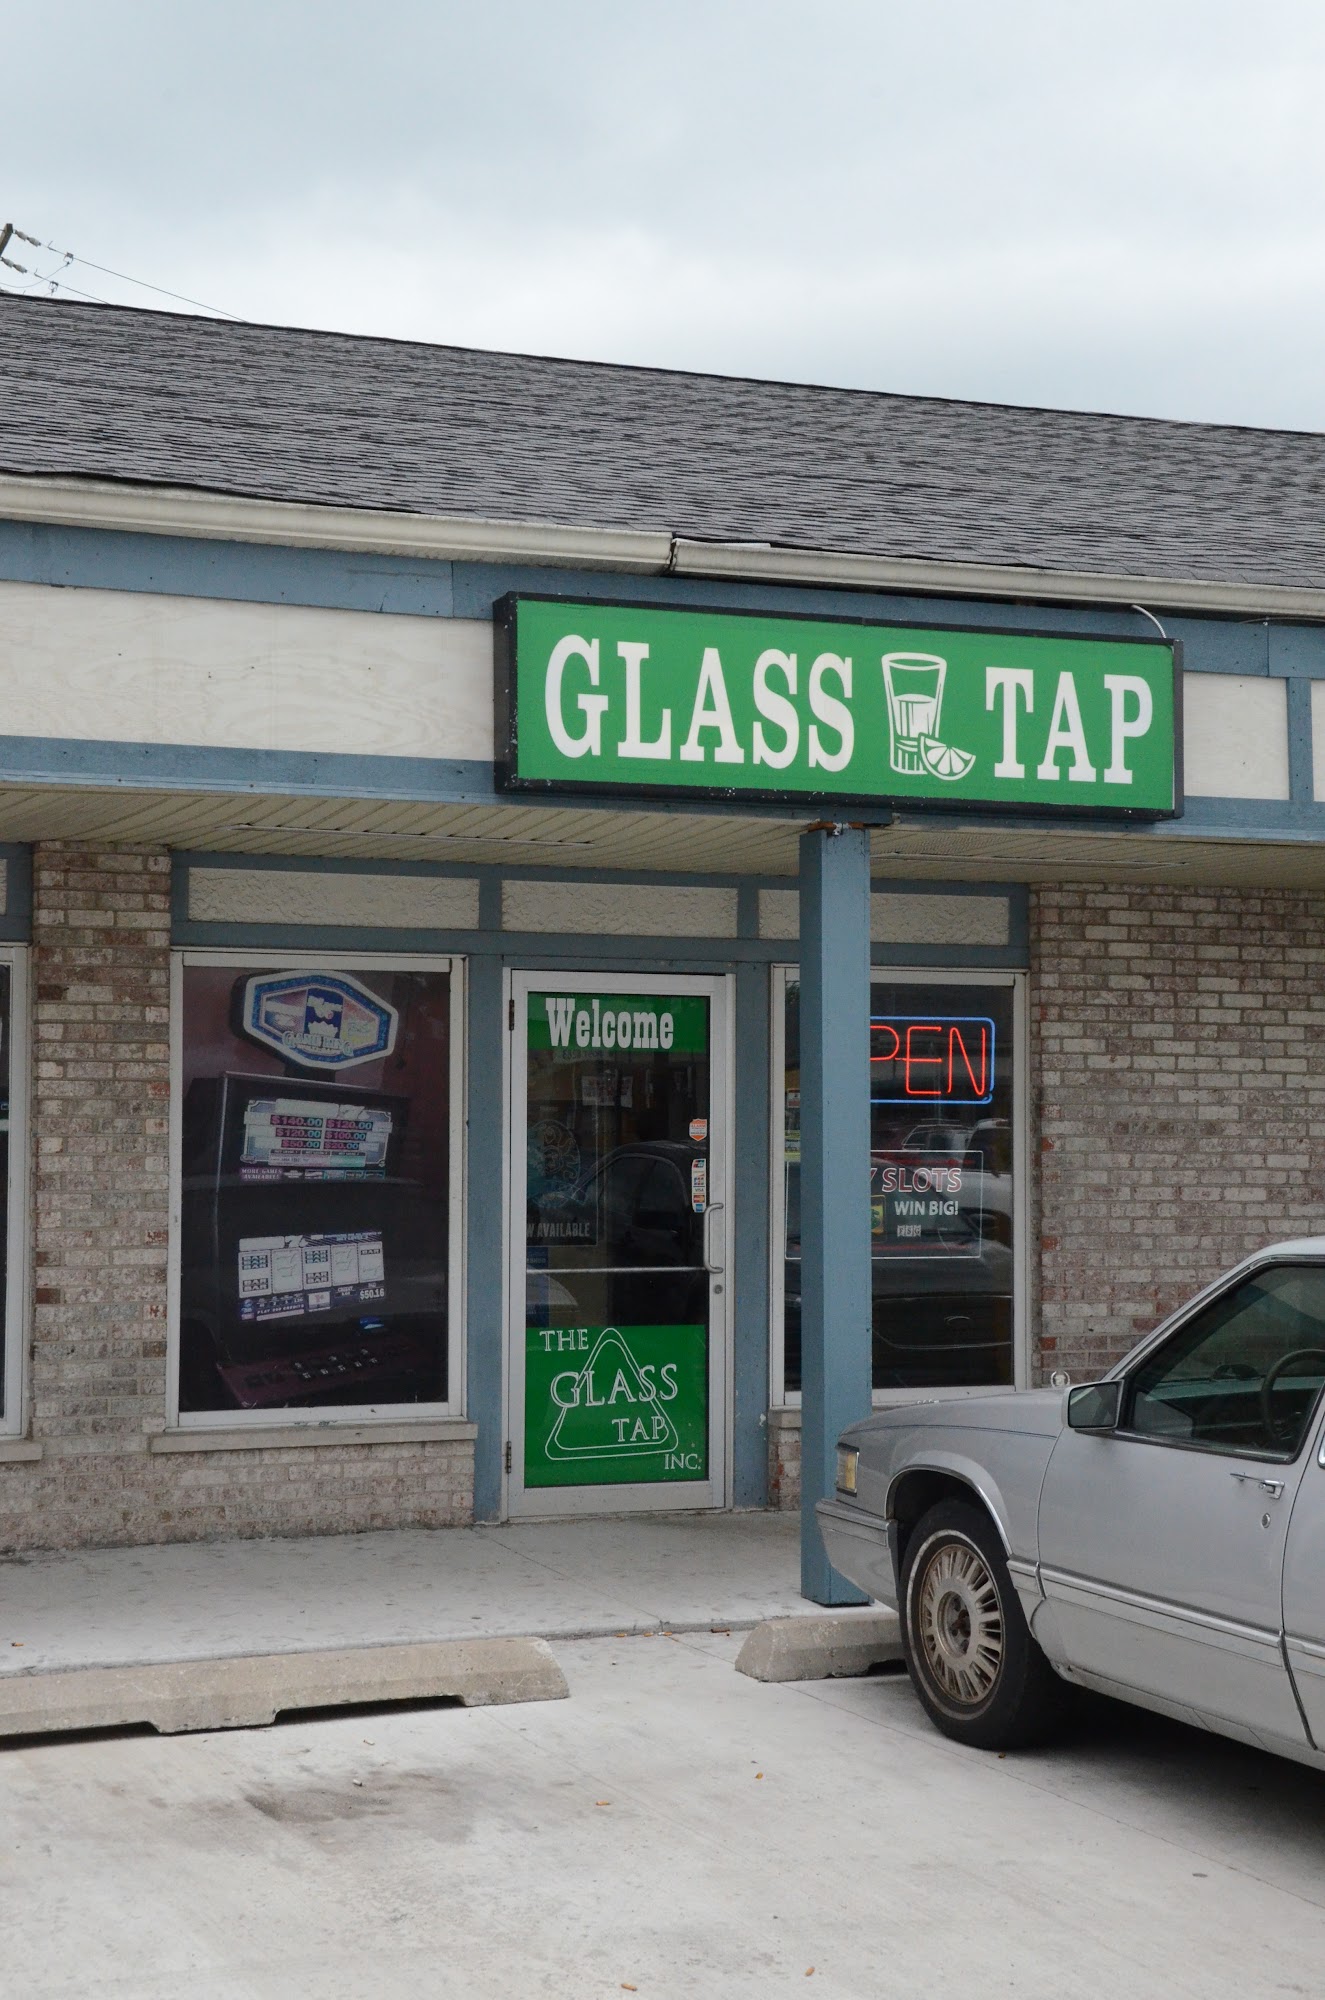 The Glass Tap